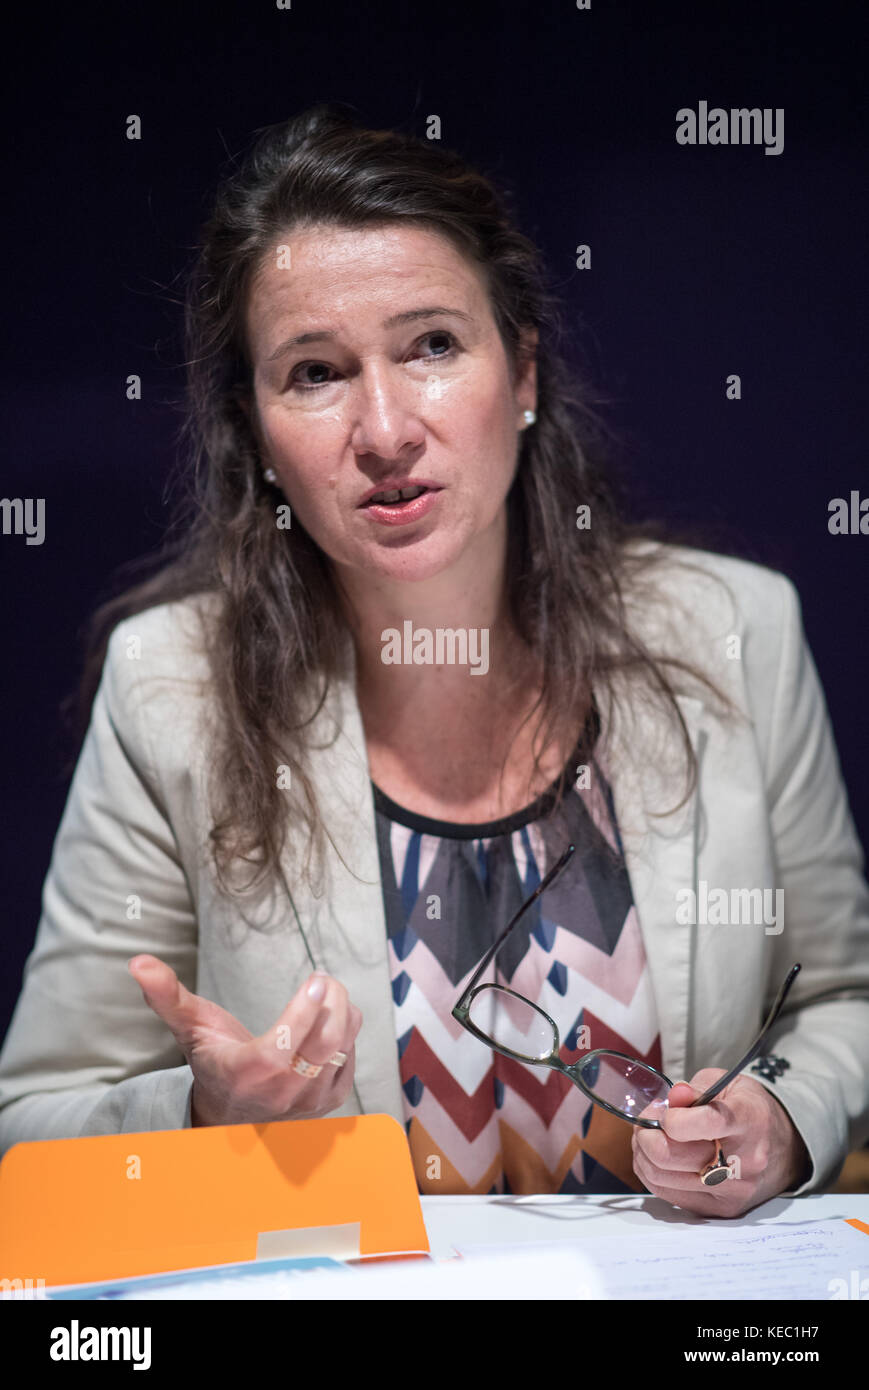 Stuttgart, Germany. 12th Oct, 2017. Inés de Castro, director of the Linden-Museum, speaks during a press conference in Stuttgart, Germany, 12 October 2017. Credit: Sebastian Gollnow/dpa/Alamy Live News Stock Photo